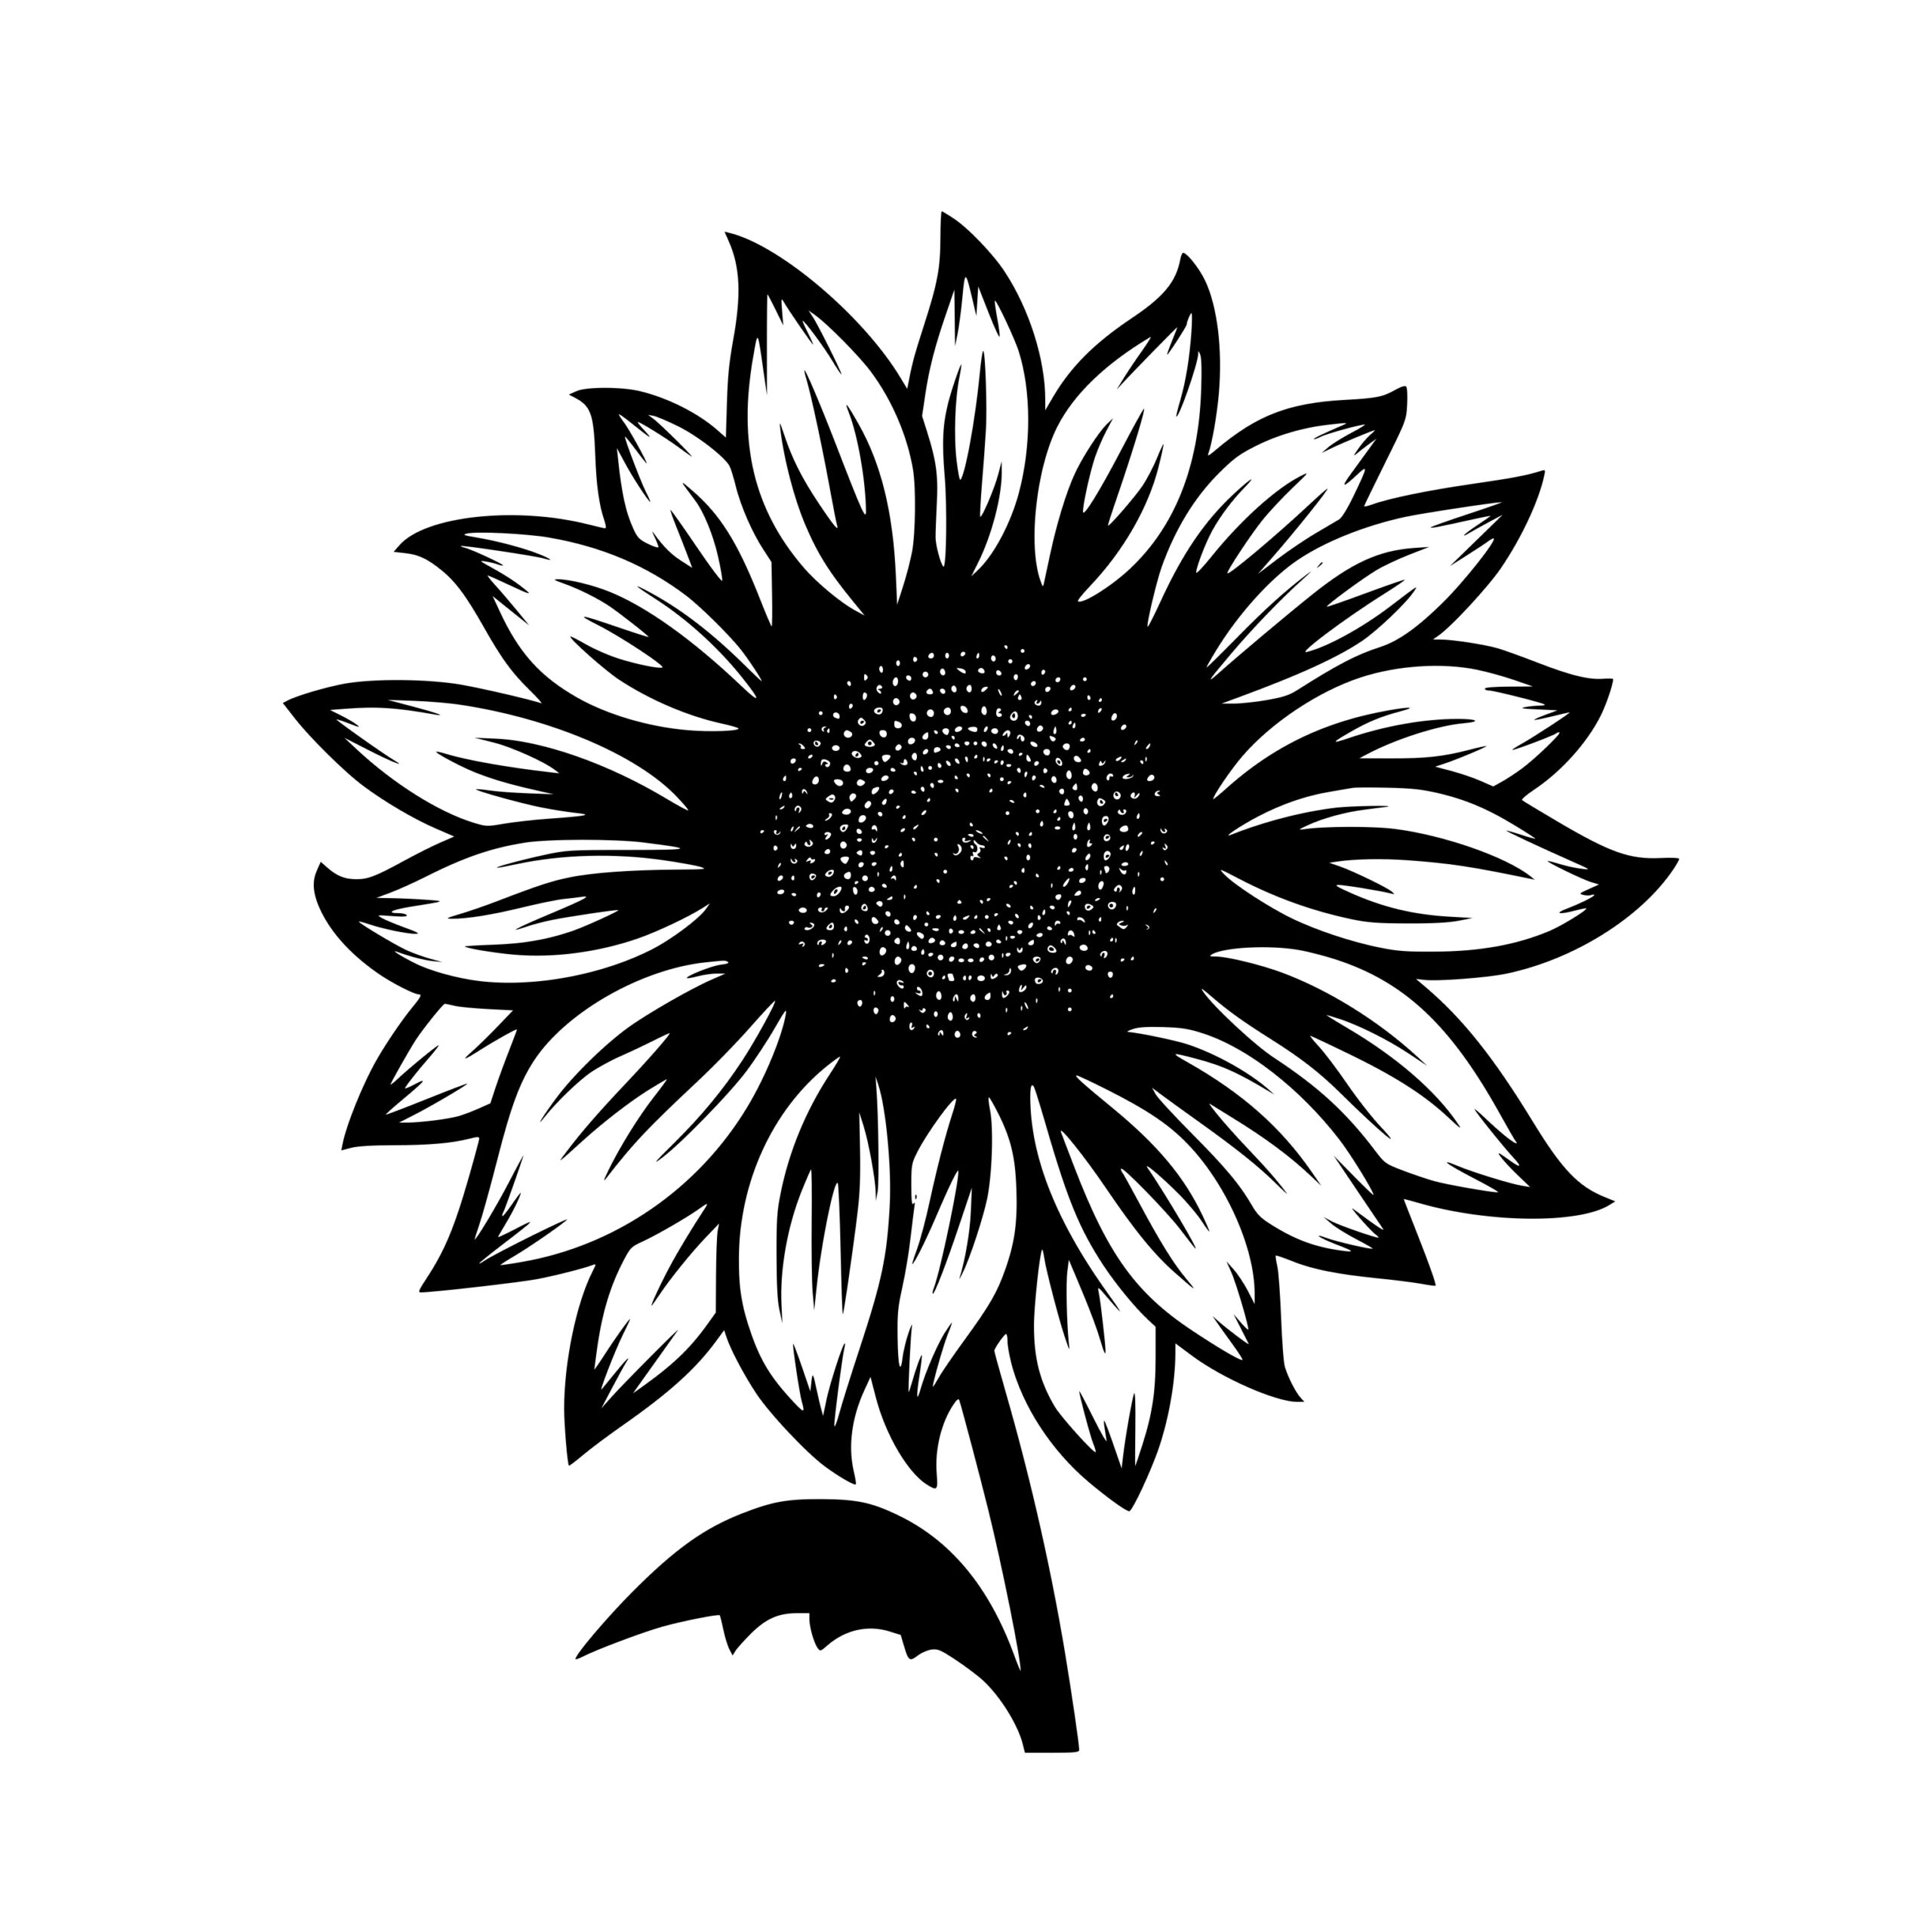 Sunflower Bloom SVG File for Cricut, Silhouette, Laser Machines